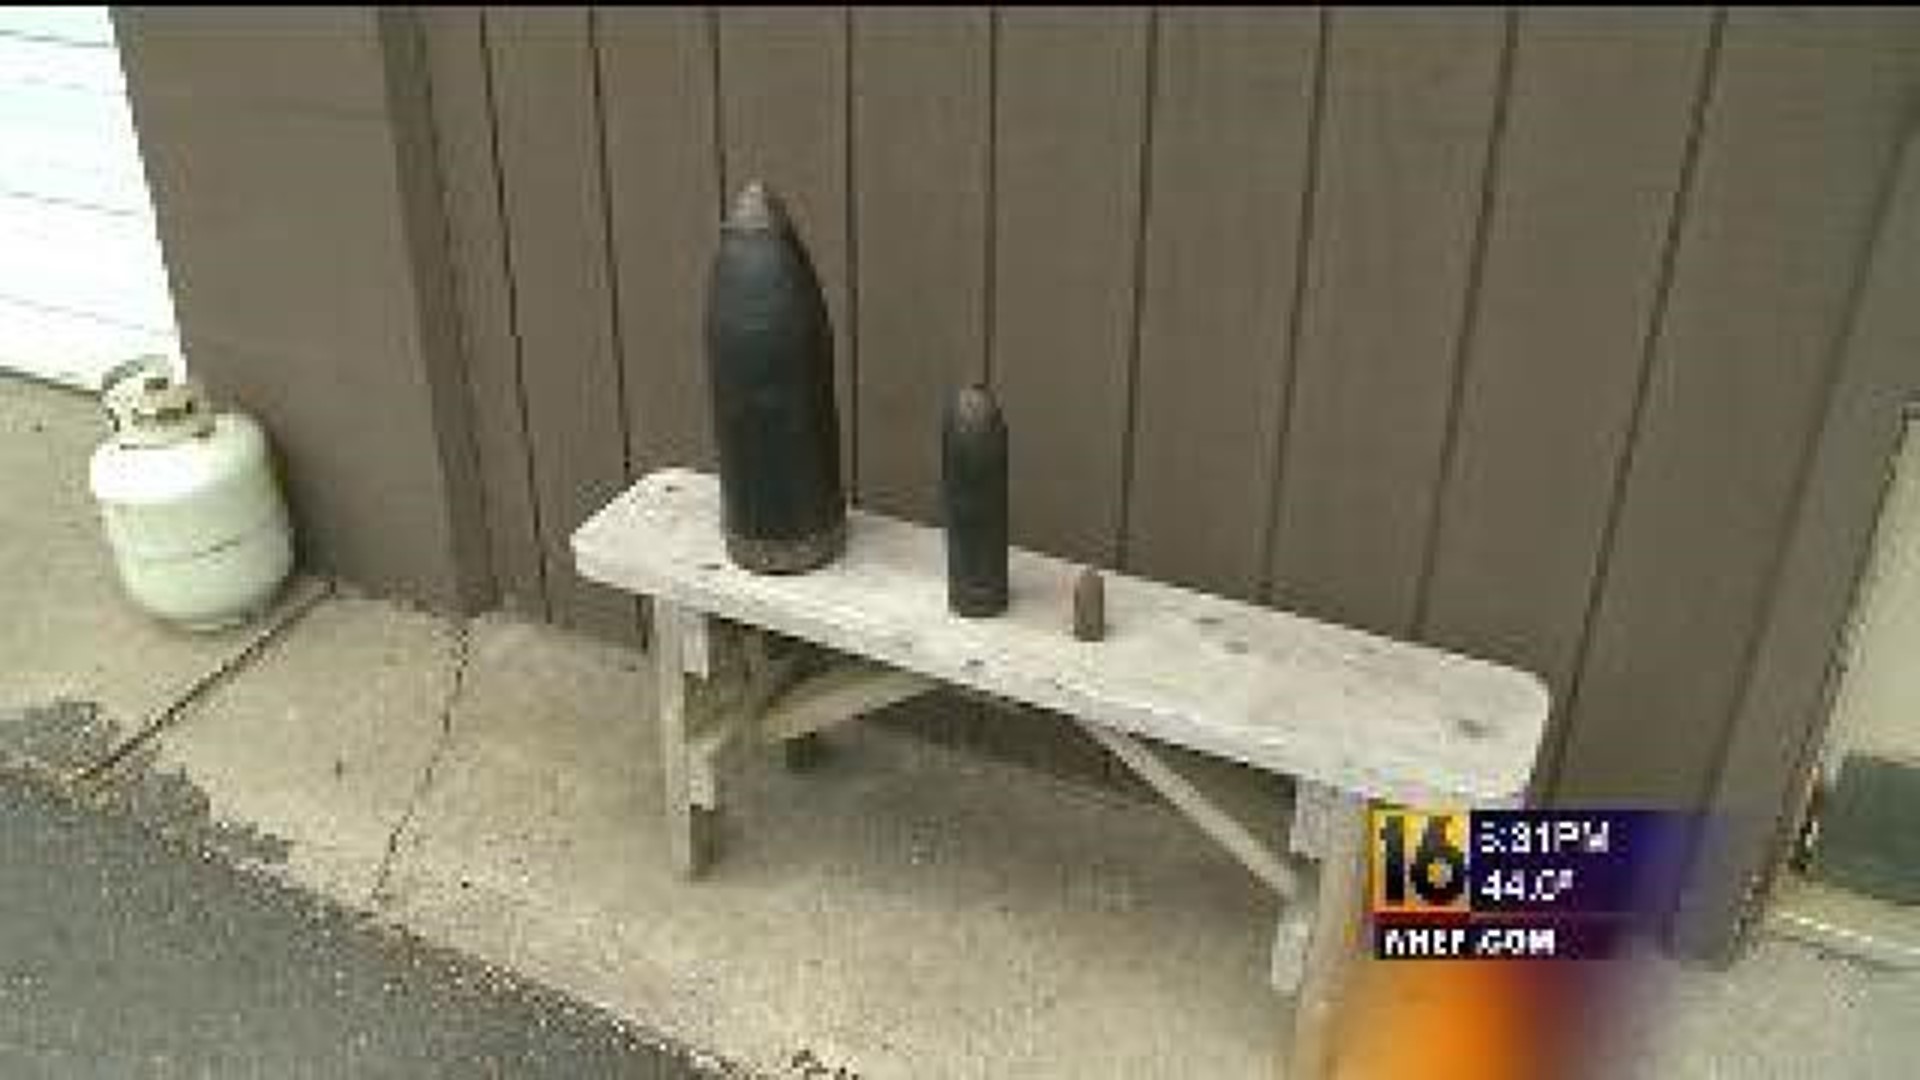 Searching for Munitions at Tobyhanna S.P.